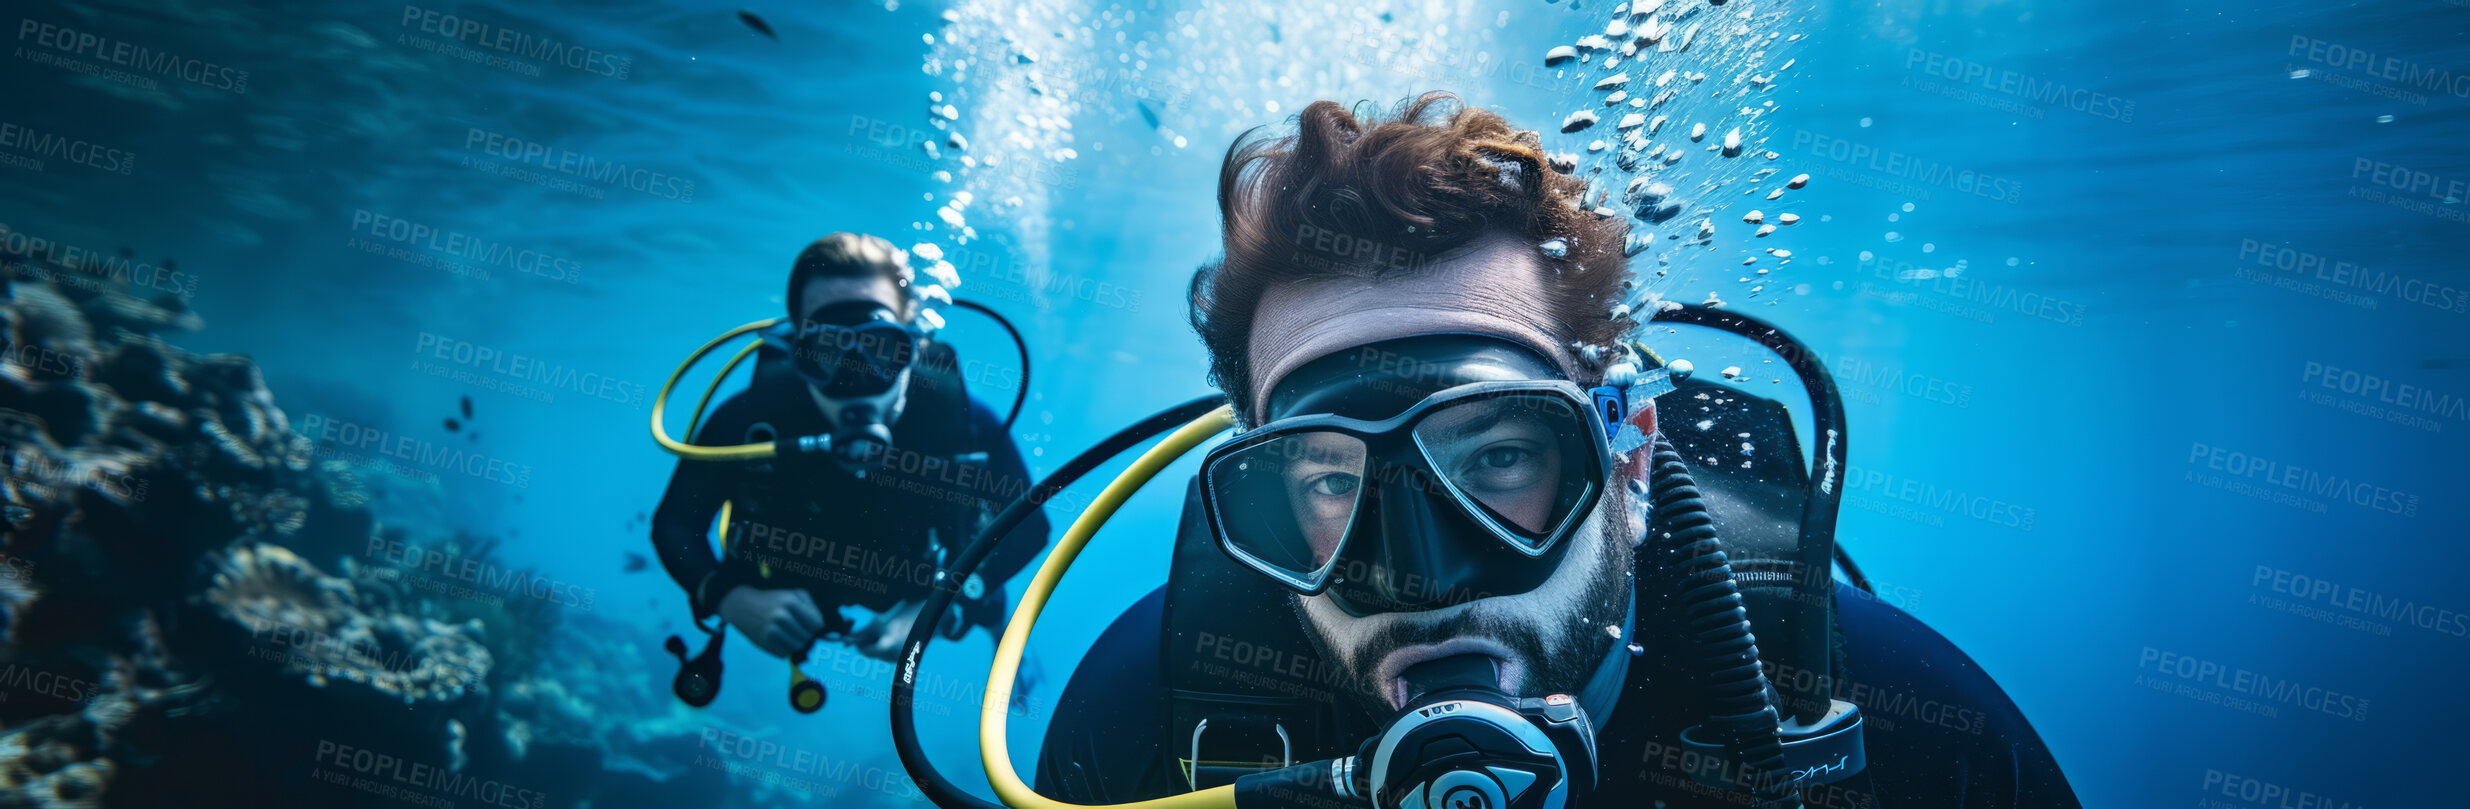 Buy stock photo Scuba diving, underwater or diver swimming and exploring for marine adventure, hobby or vacation activity. Beautiful, blue and clear calm ocean view for travel, exploration or environmental discovery